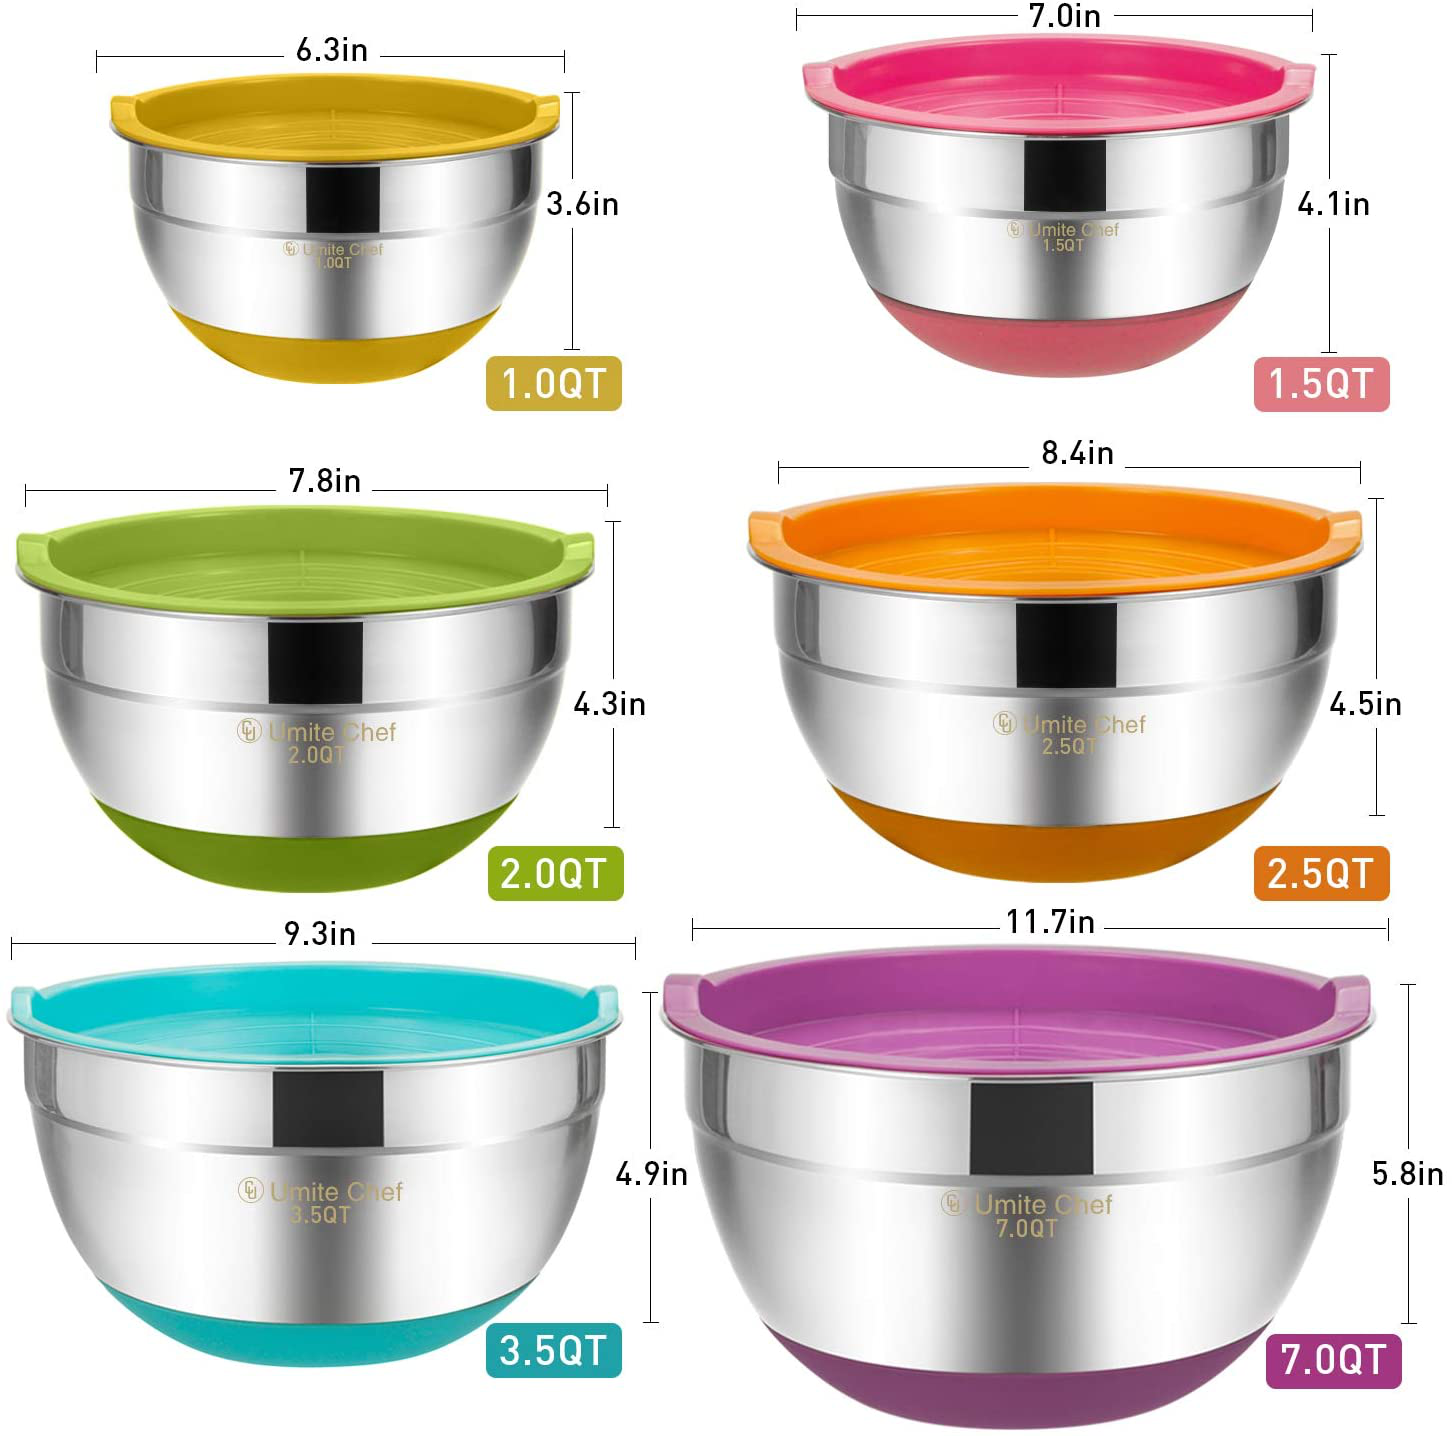 Mixing Bowls with Airtight Lids，6 piece Stainless Steel Metal Nesting Storage Bowls by Umite Chef, Non-Slip Bottoms Size 7, 3.5, 2.5, 2.0,1.5, 1QT, Great for Mixing & Serving(Grey)